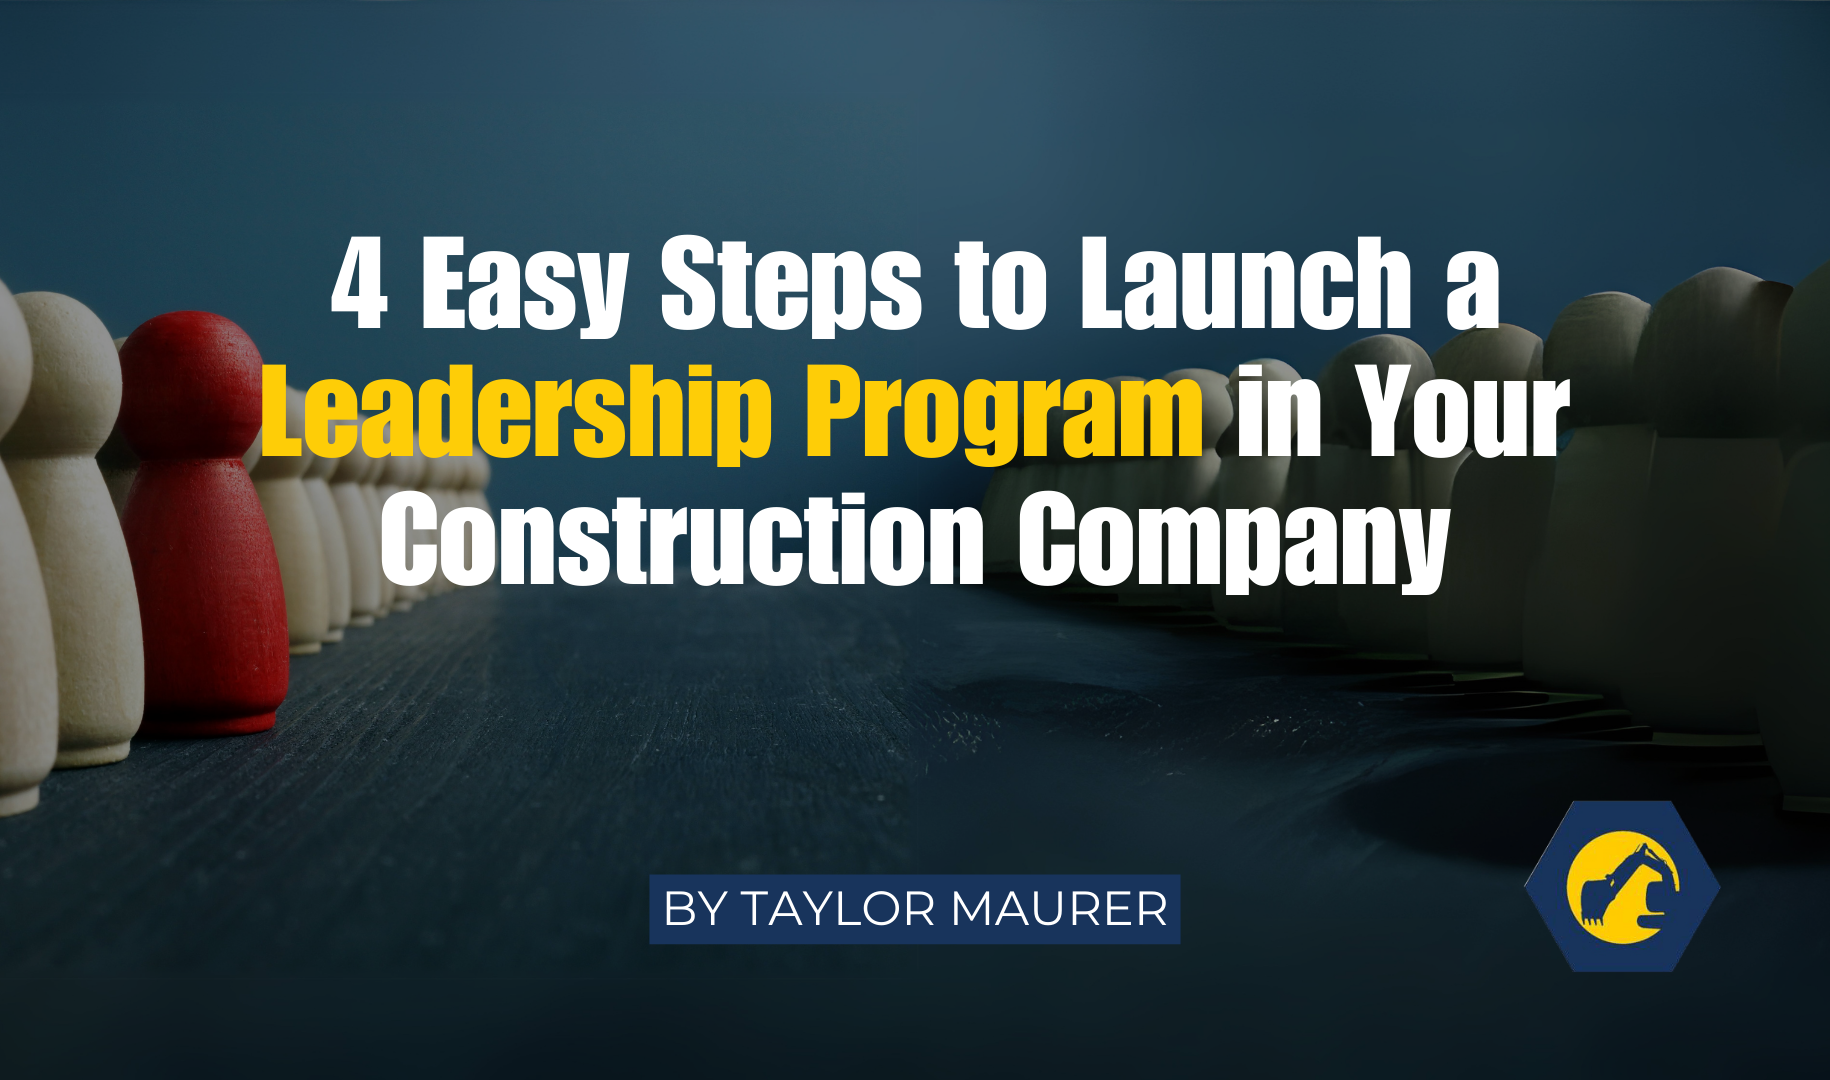 4 Easy Steps to Launch a Leadership Program in Your Construction Company